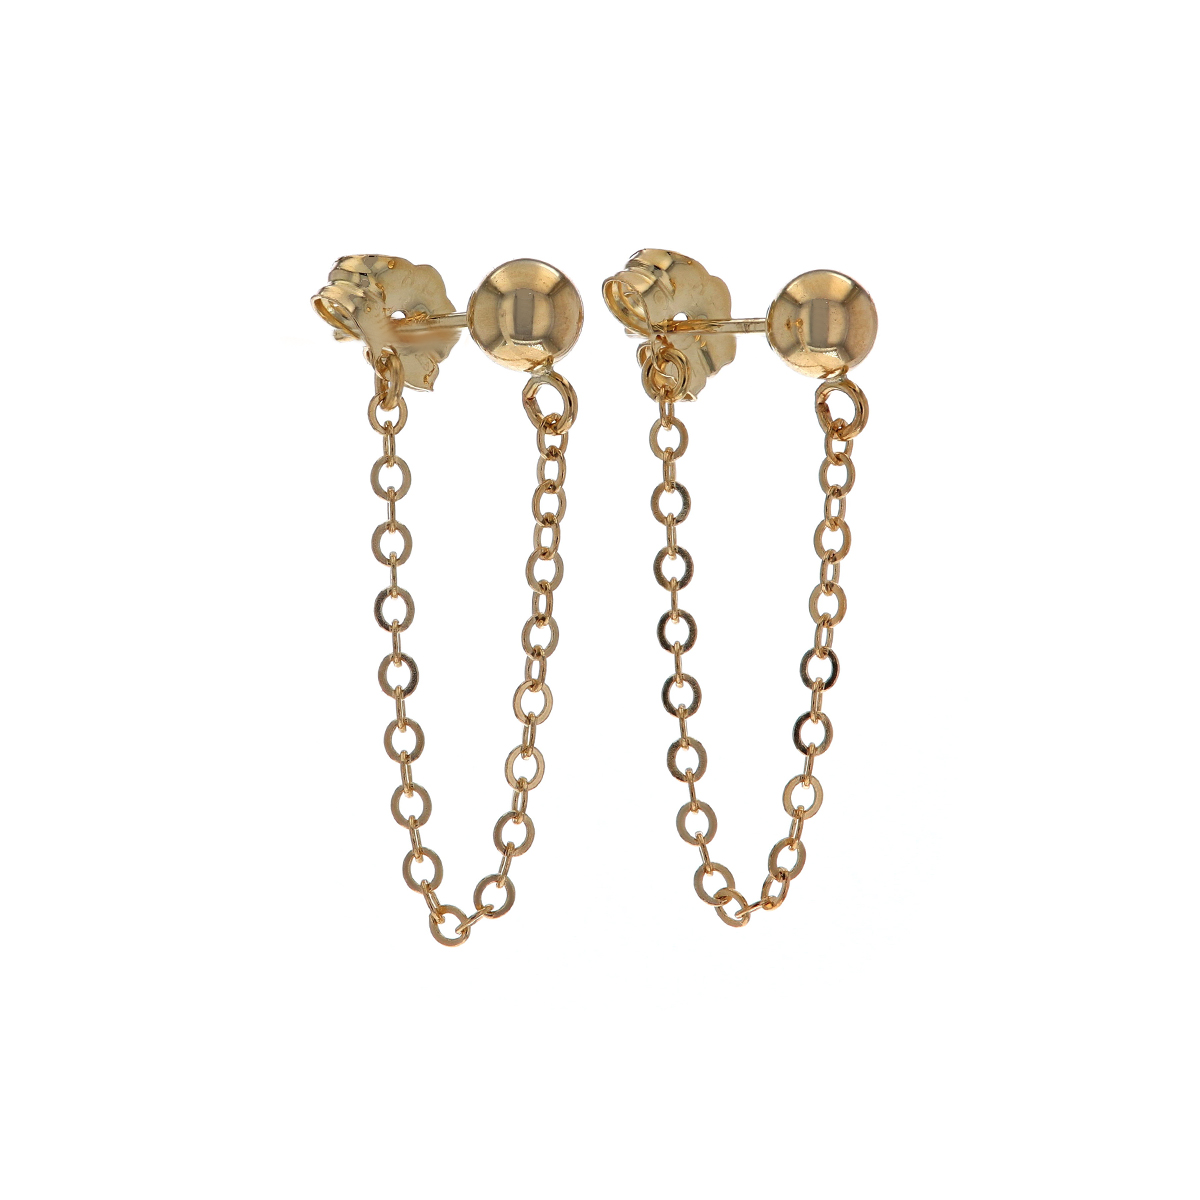 14K Yellow Gold Bead with Chain Earrings